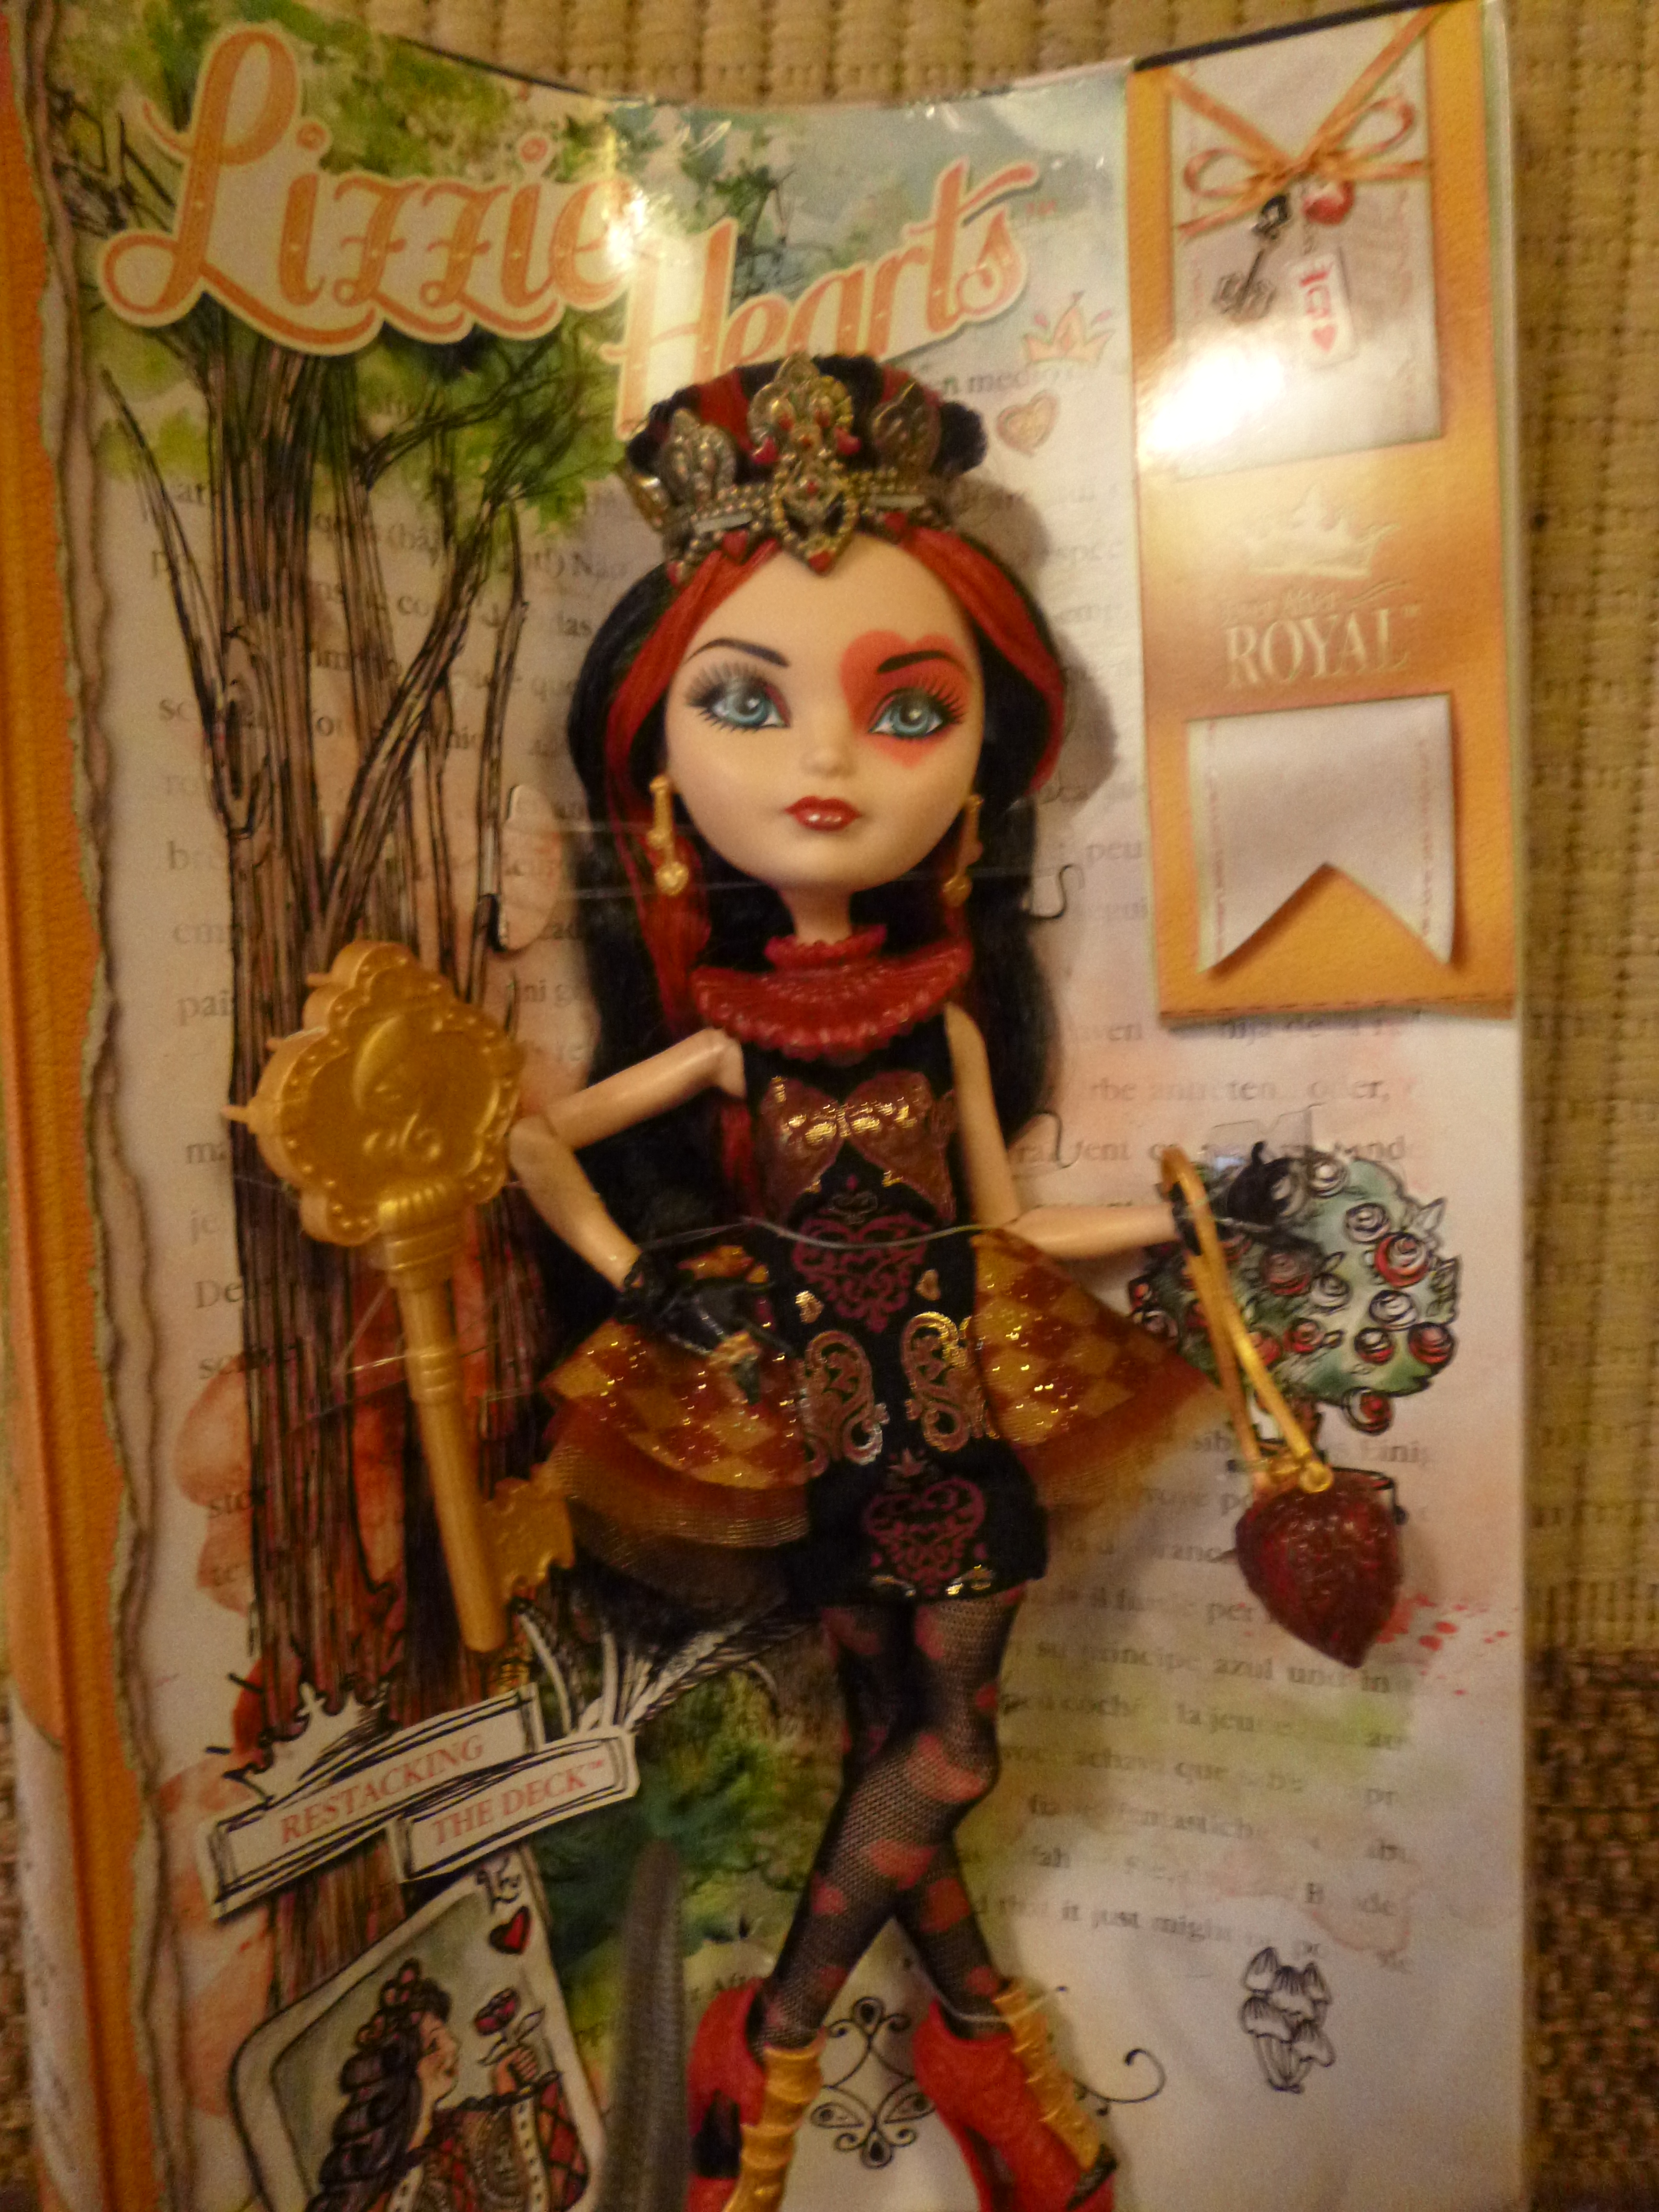  Ever After High Lizzie Hearts : Toys & Games